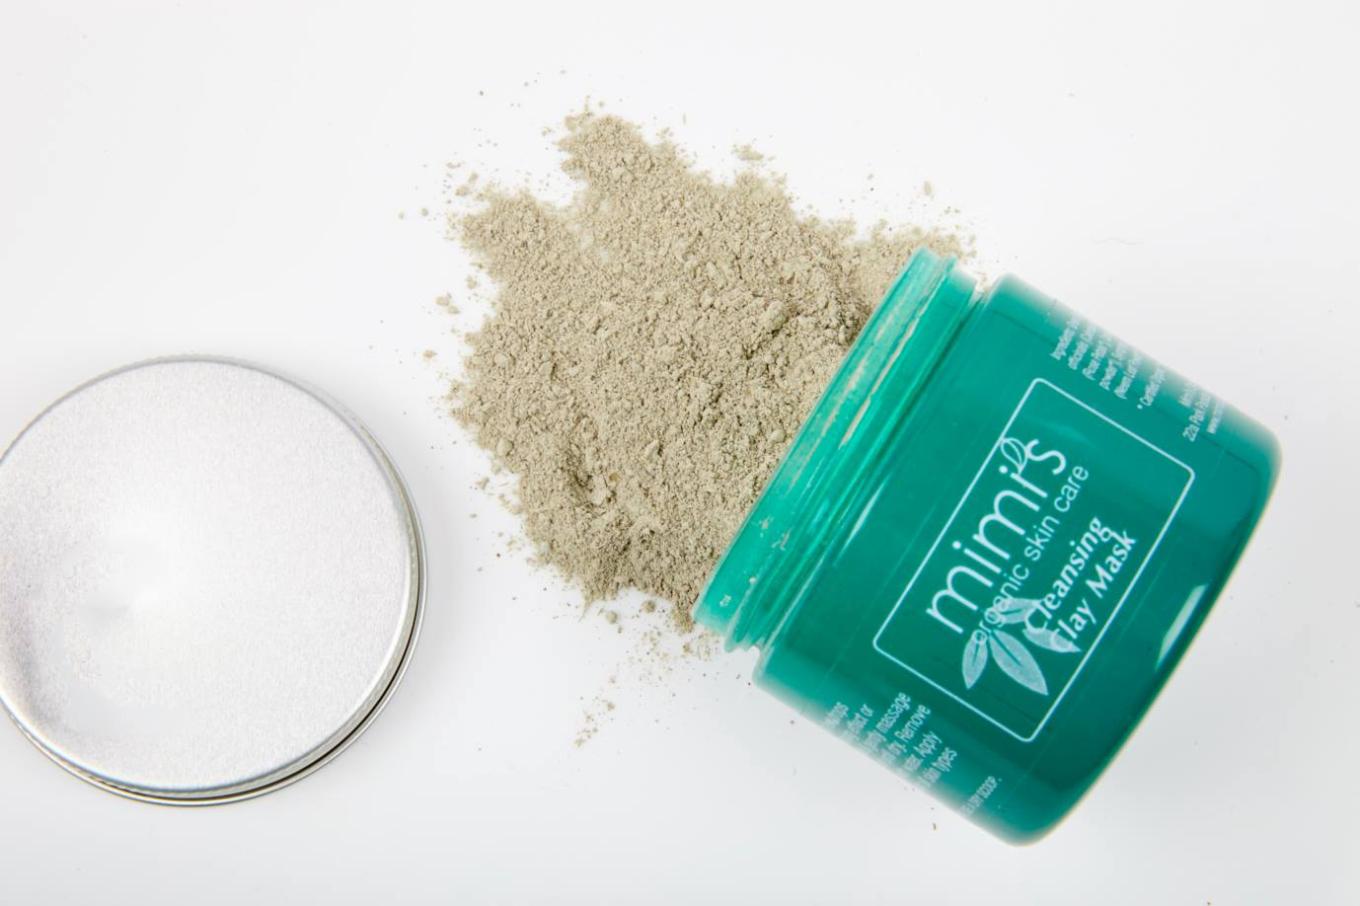 A pot of Mimi's Organics Cleansing Clay Mask spilling out on the counter